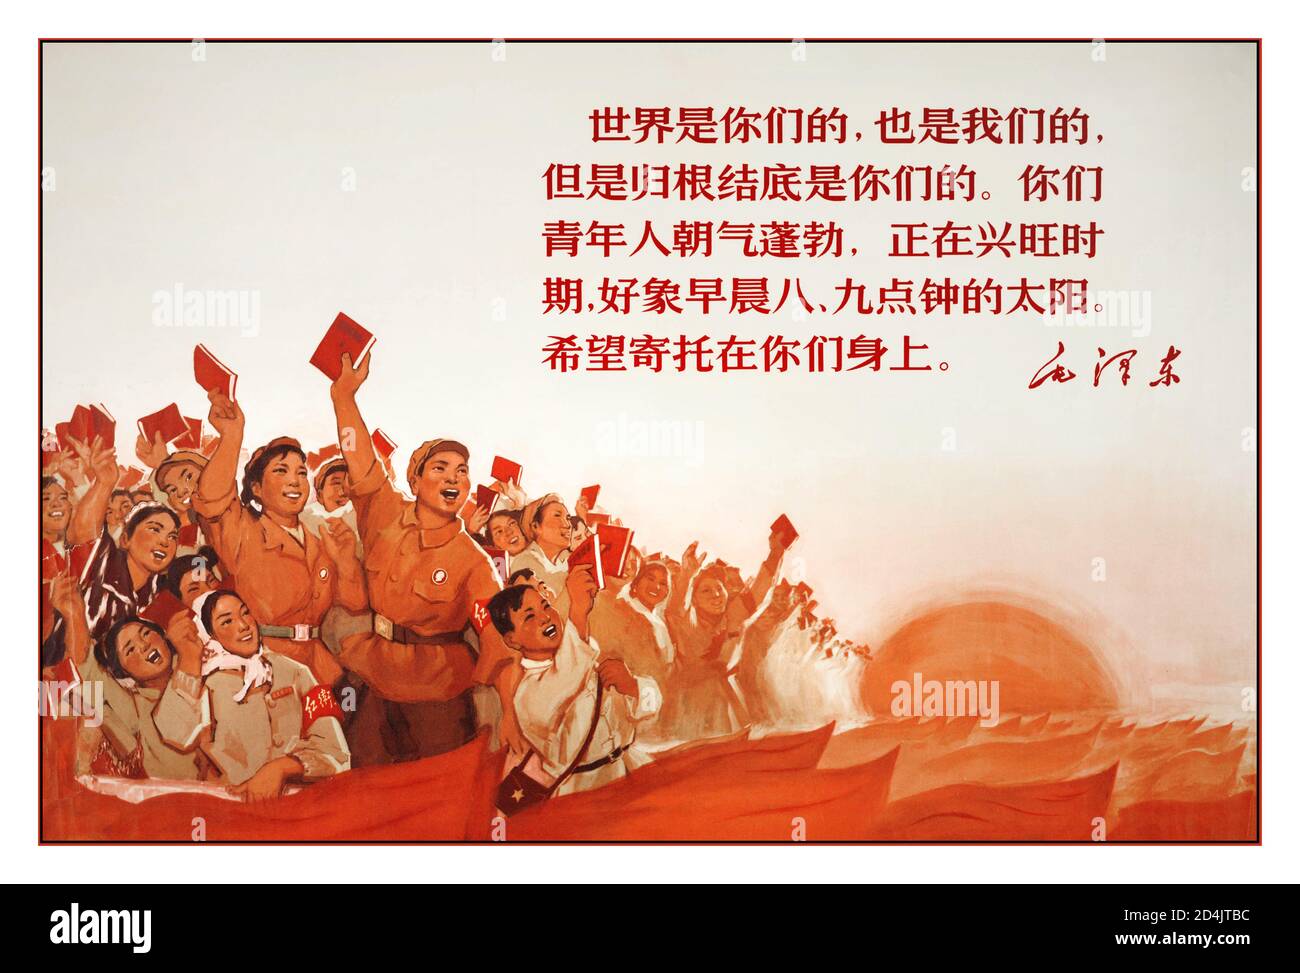 Vintage 1960's Chinese Revolution Poster Chairman Mao Zedong: 'The world is yours, as well as ours, but in the last analysis, it is yours, you young people, full of vigor and vitality ' 1967. Mao’s Fighters are the Closest Followers of the Party. Beijing Film Academy Jinggangshan Commune Stock Photo